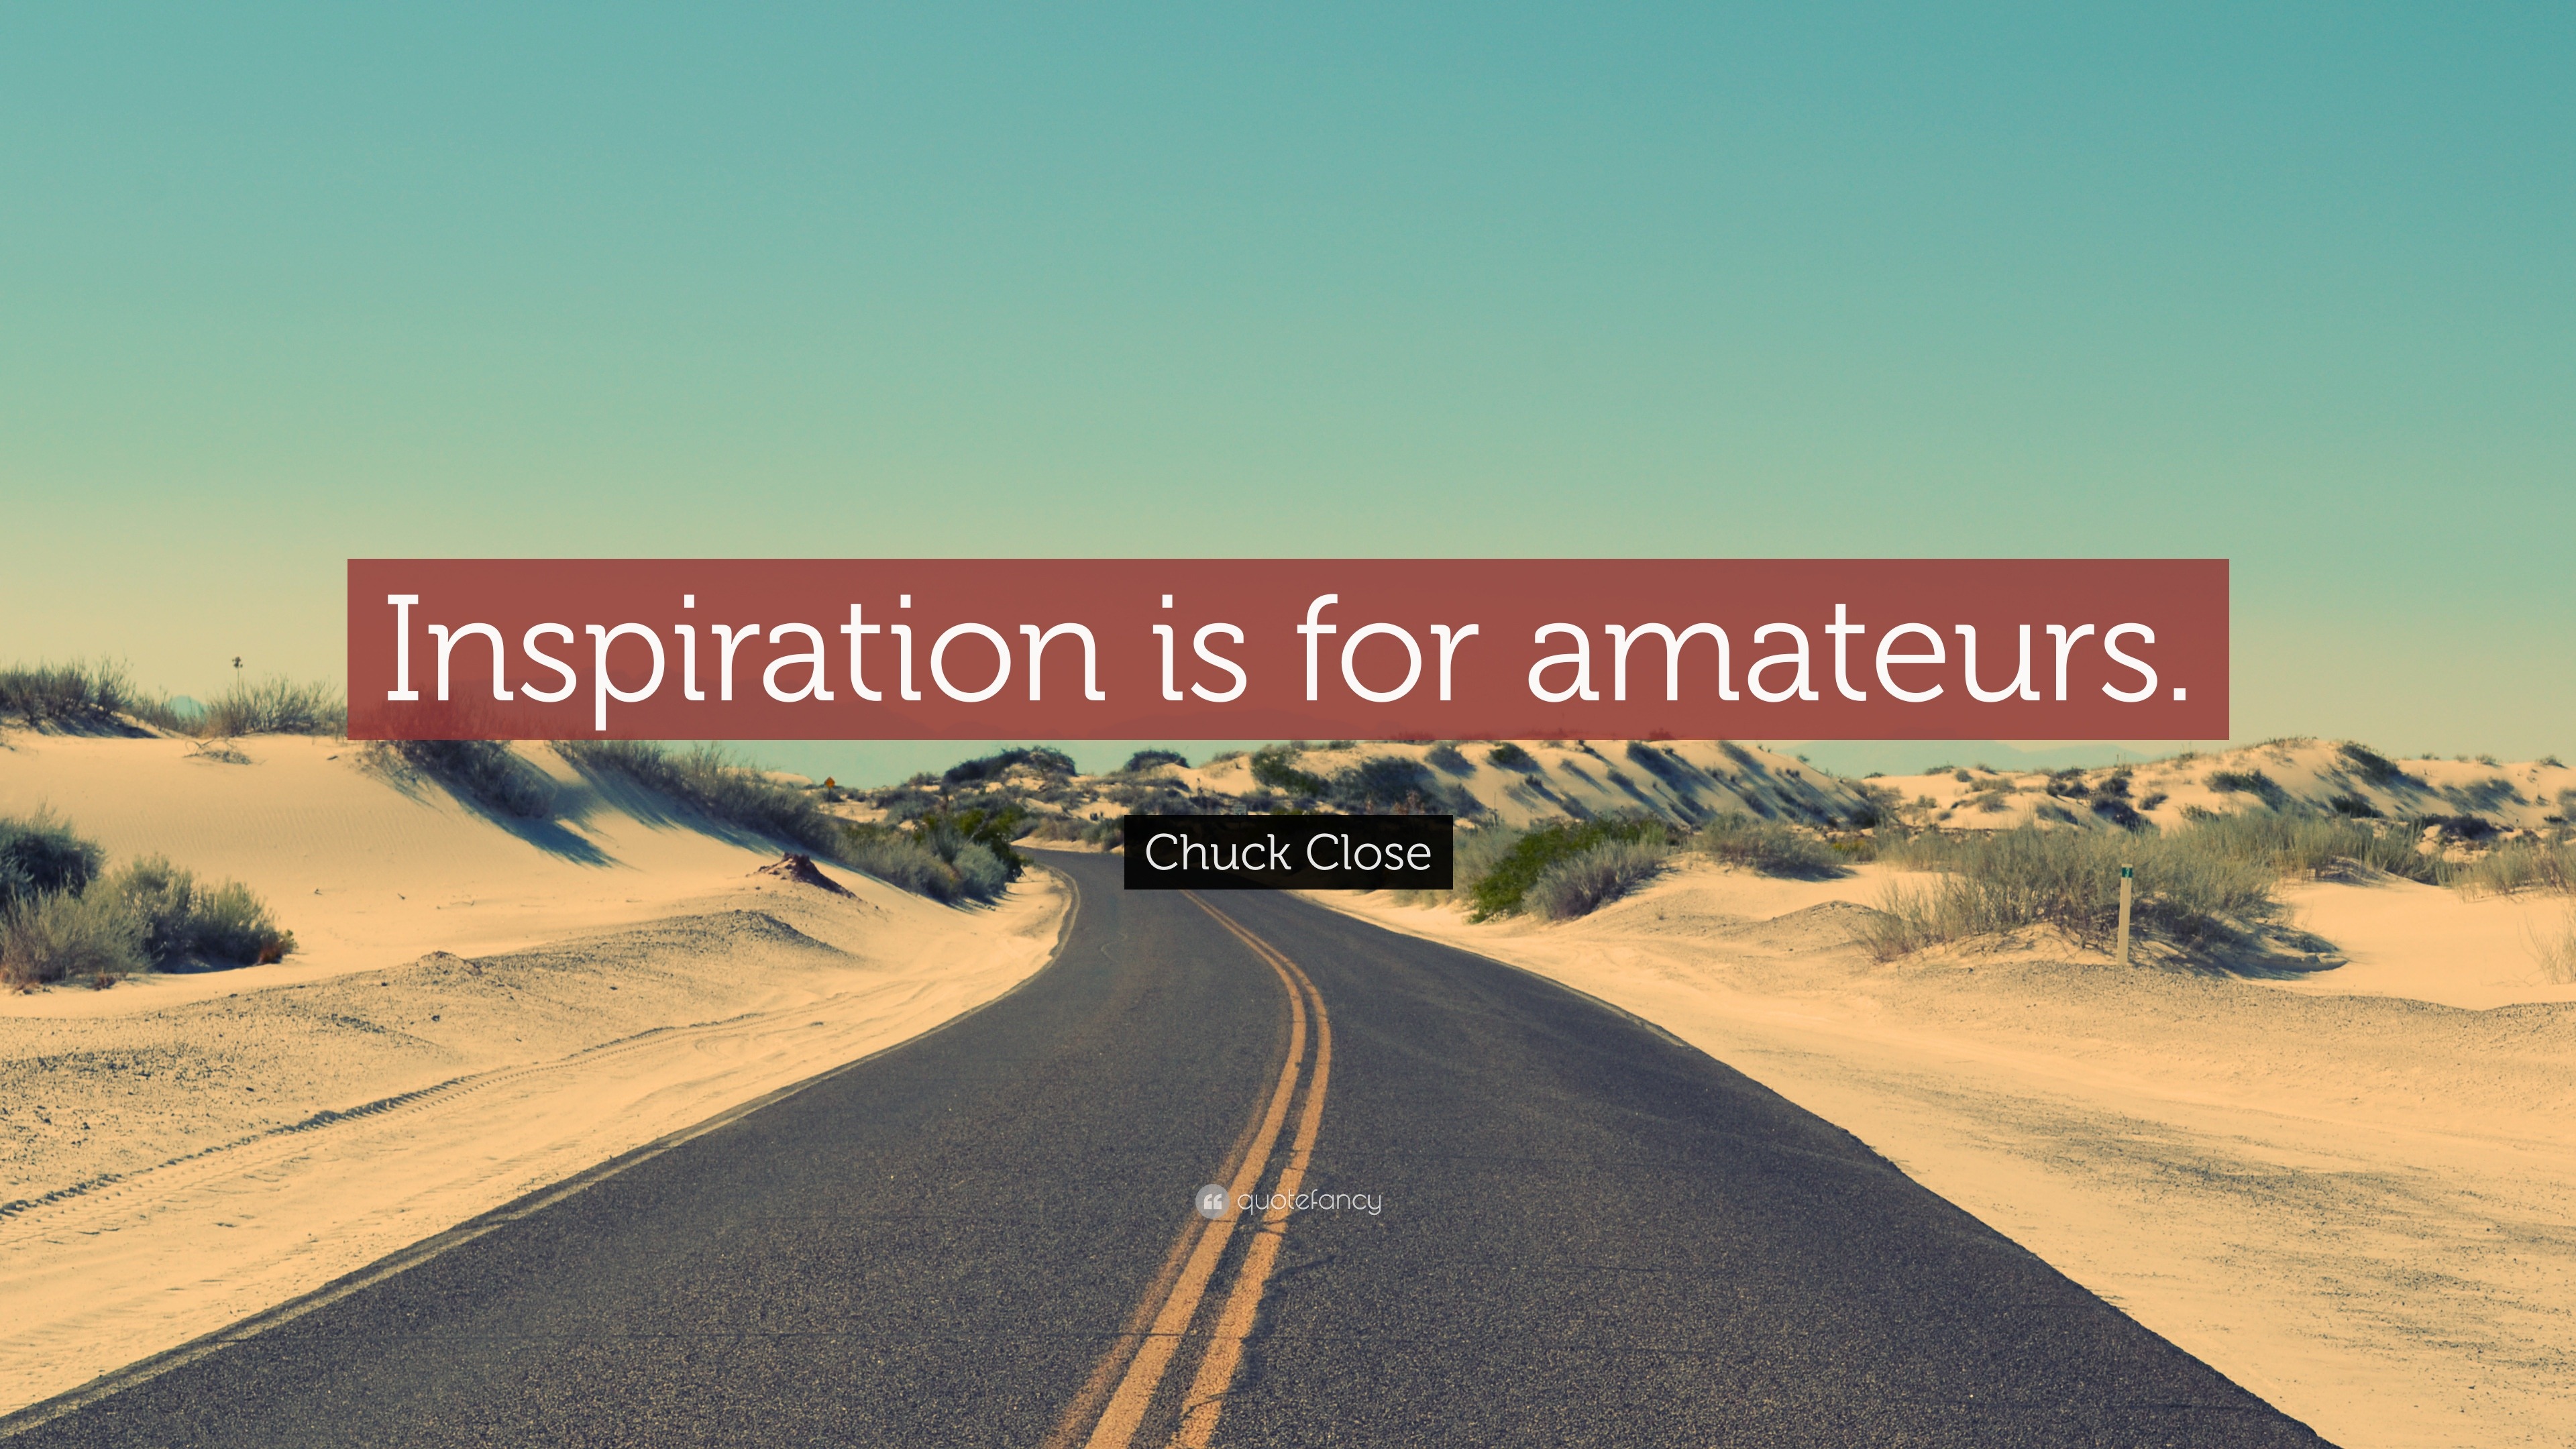 inspiration is for amateurs